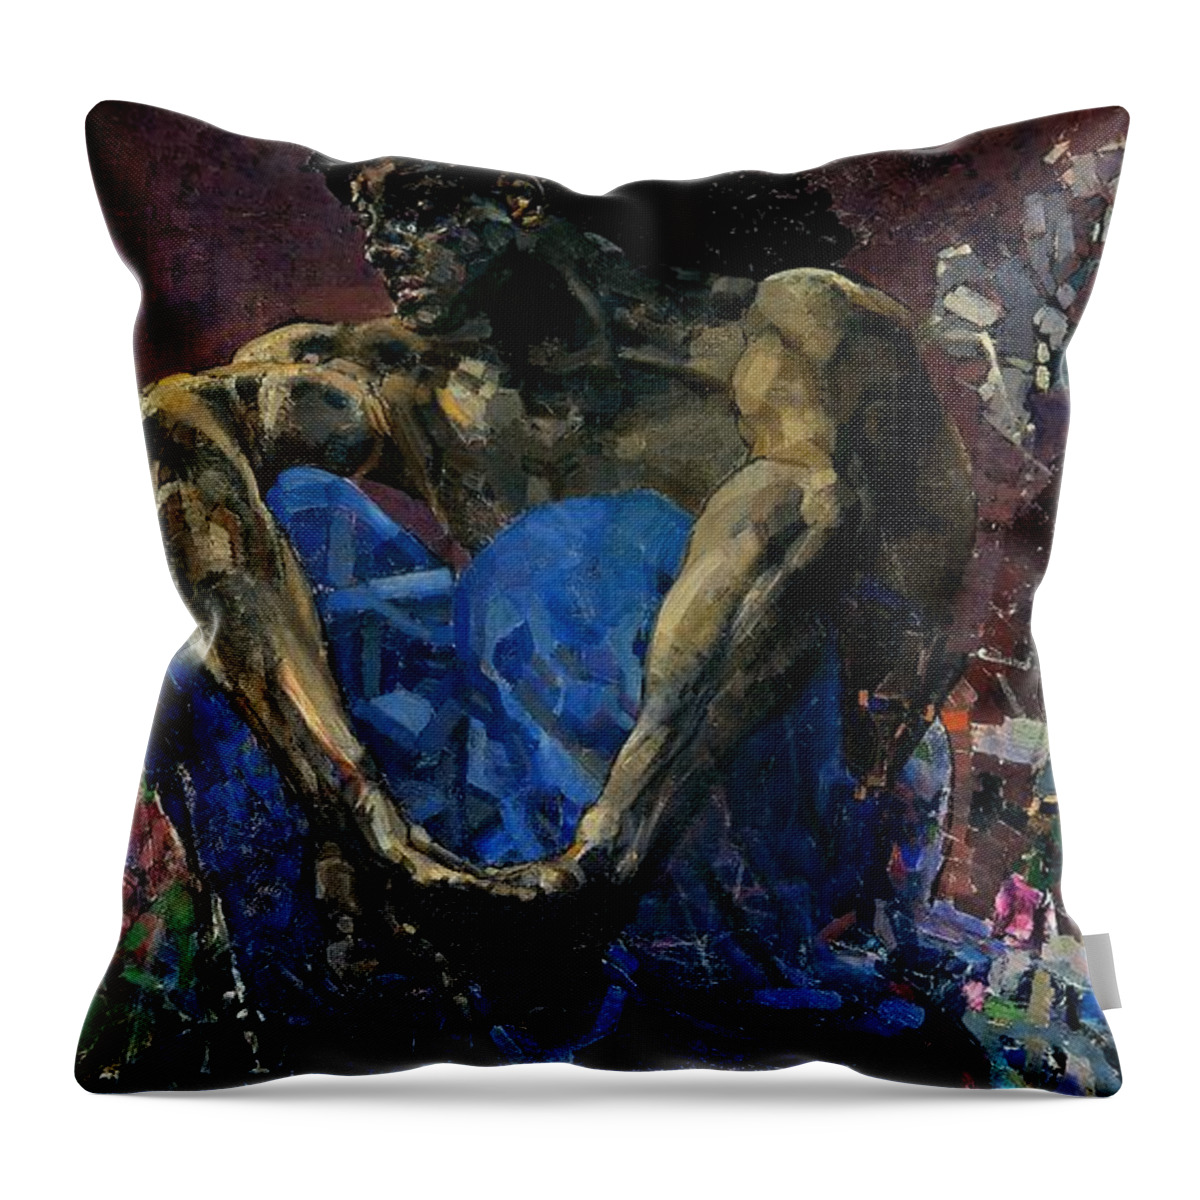 Demon Throw Pillow featuring the painting Demon by Mikhail Vrubel